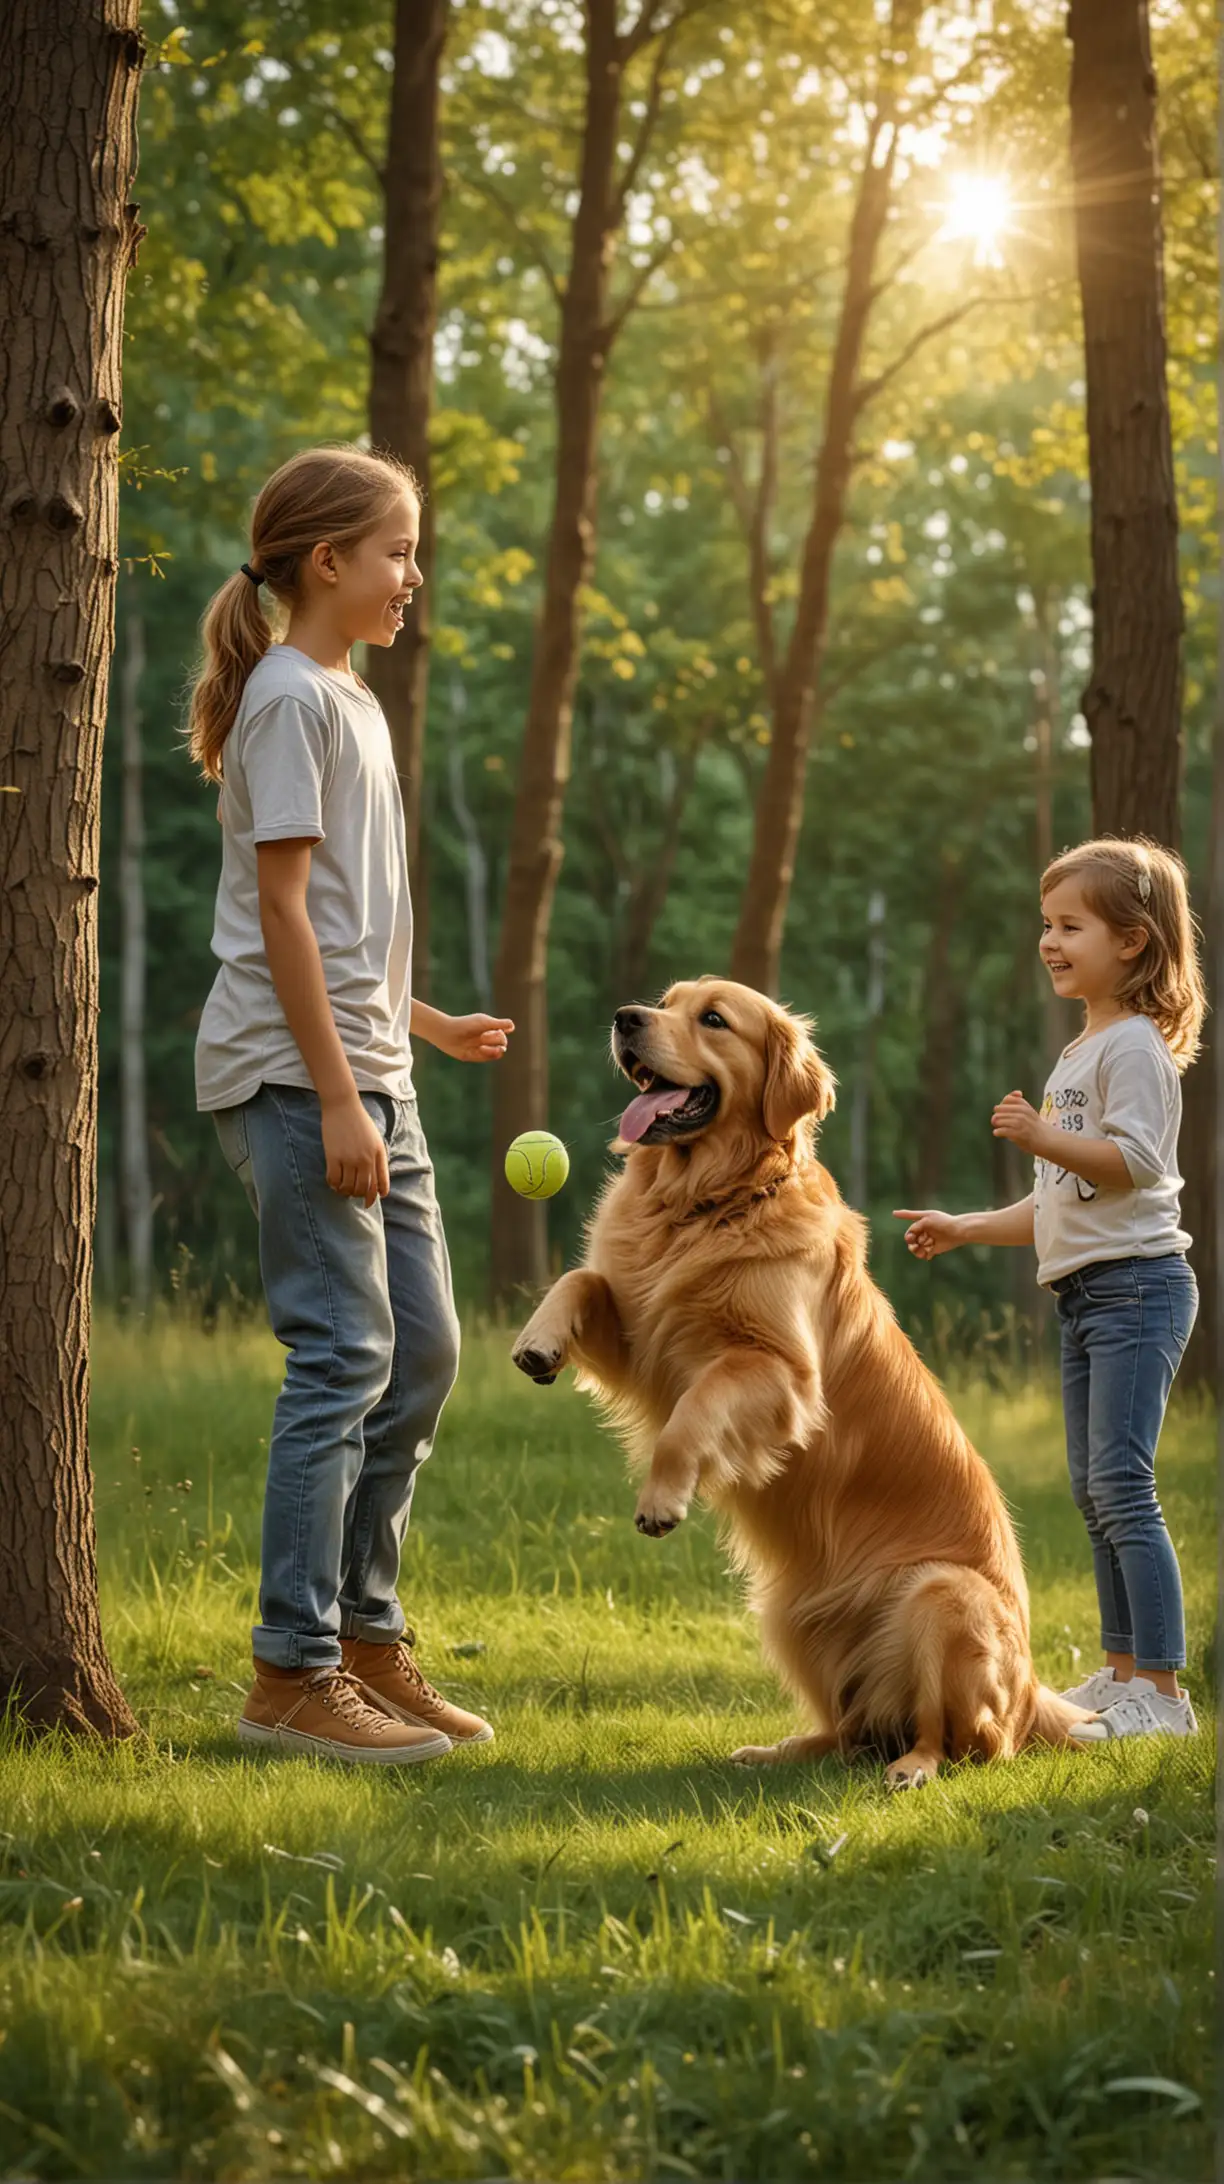 Happy Children Playing Ball with Golden Retriever Dog in Forest Setting